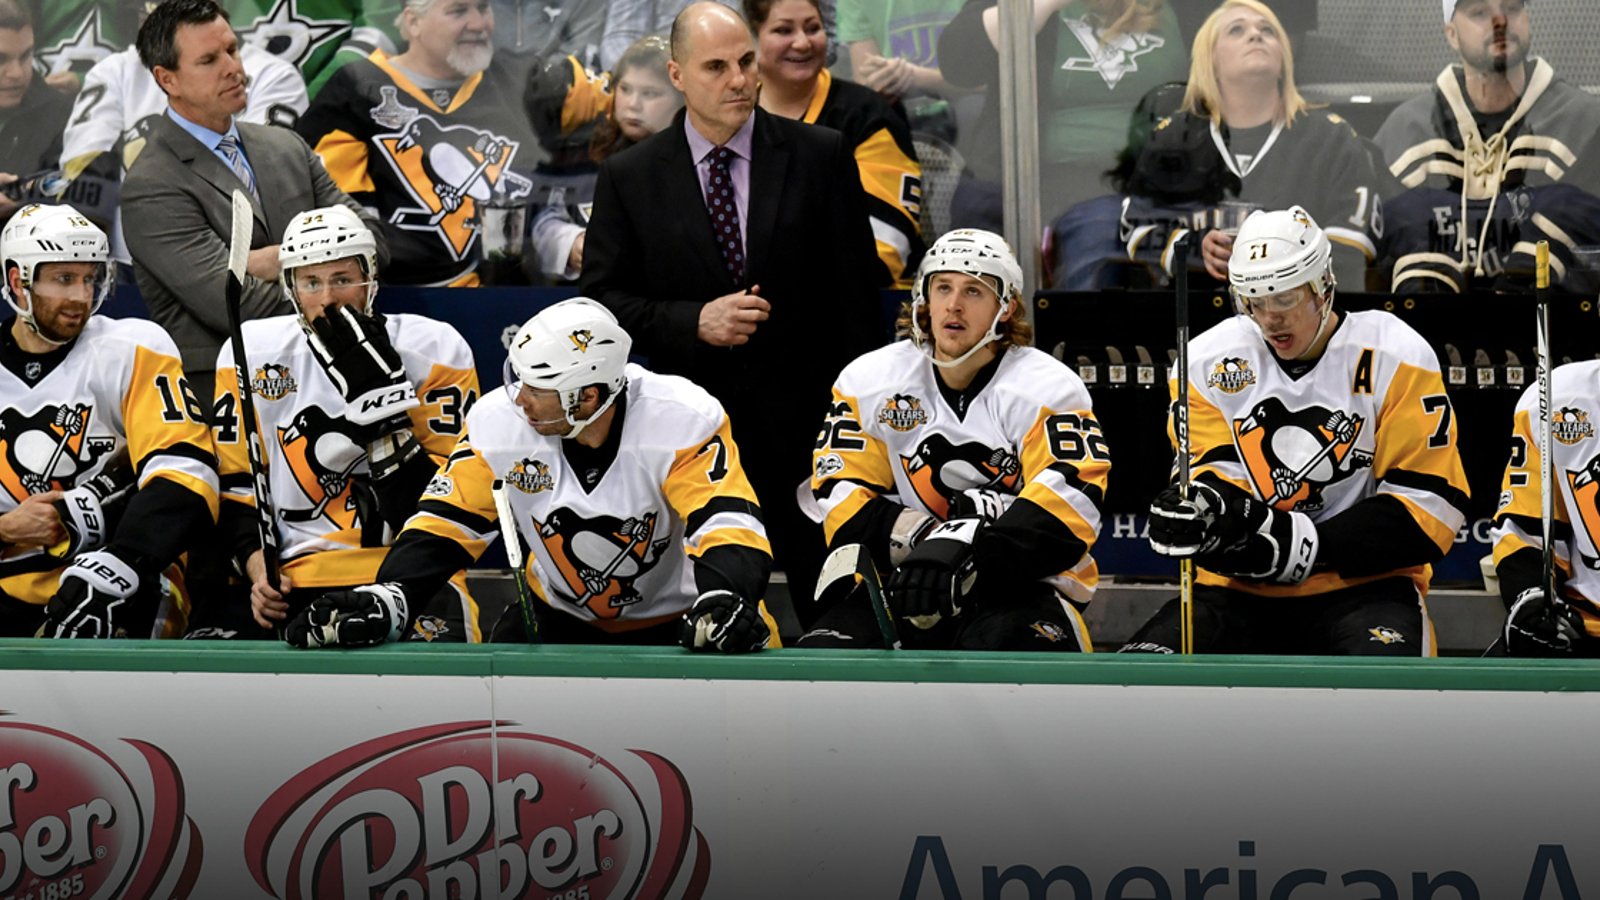 Report: Pens announce lineup change up front for tonight's game